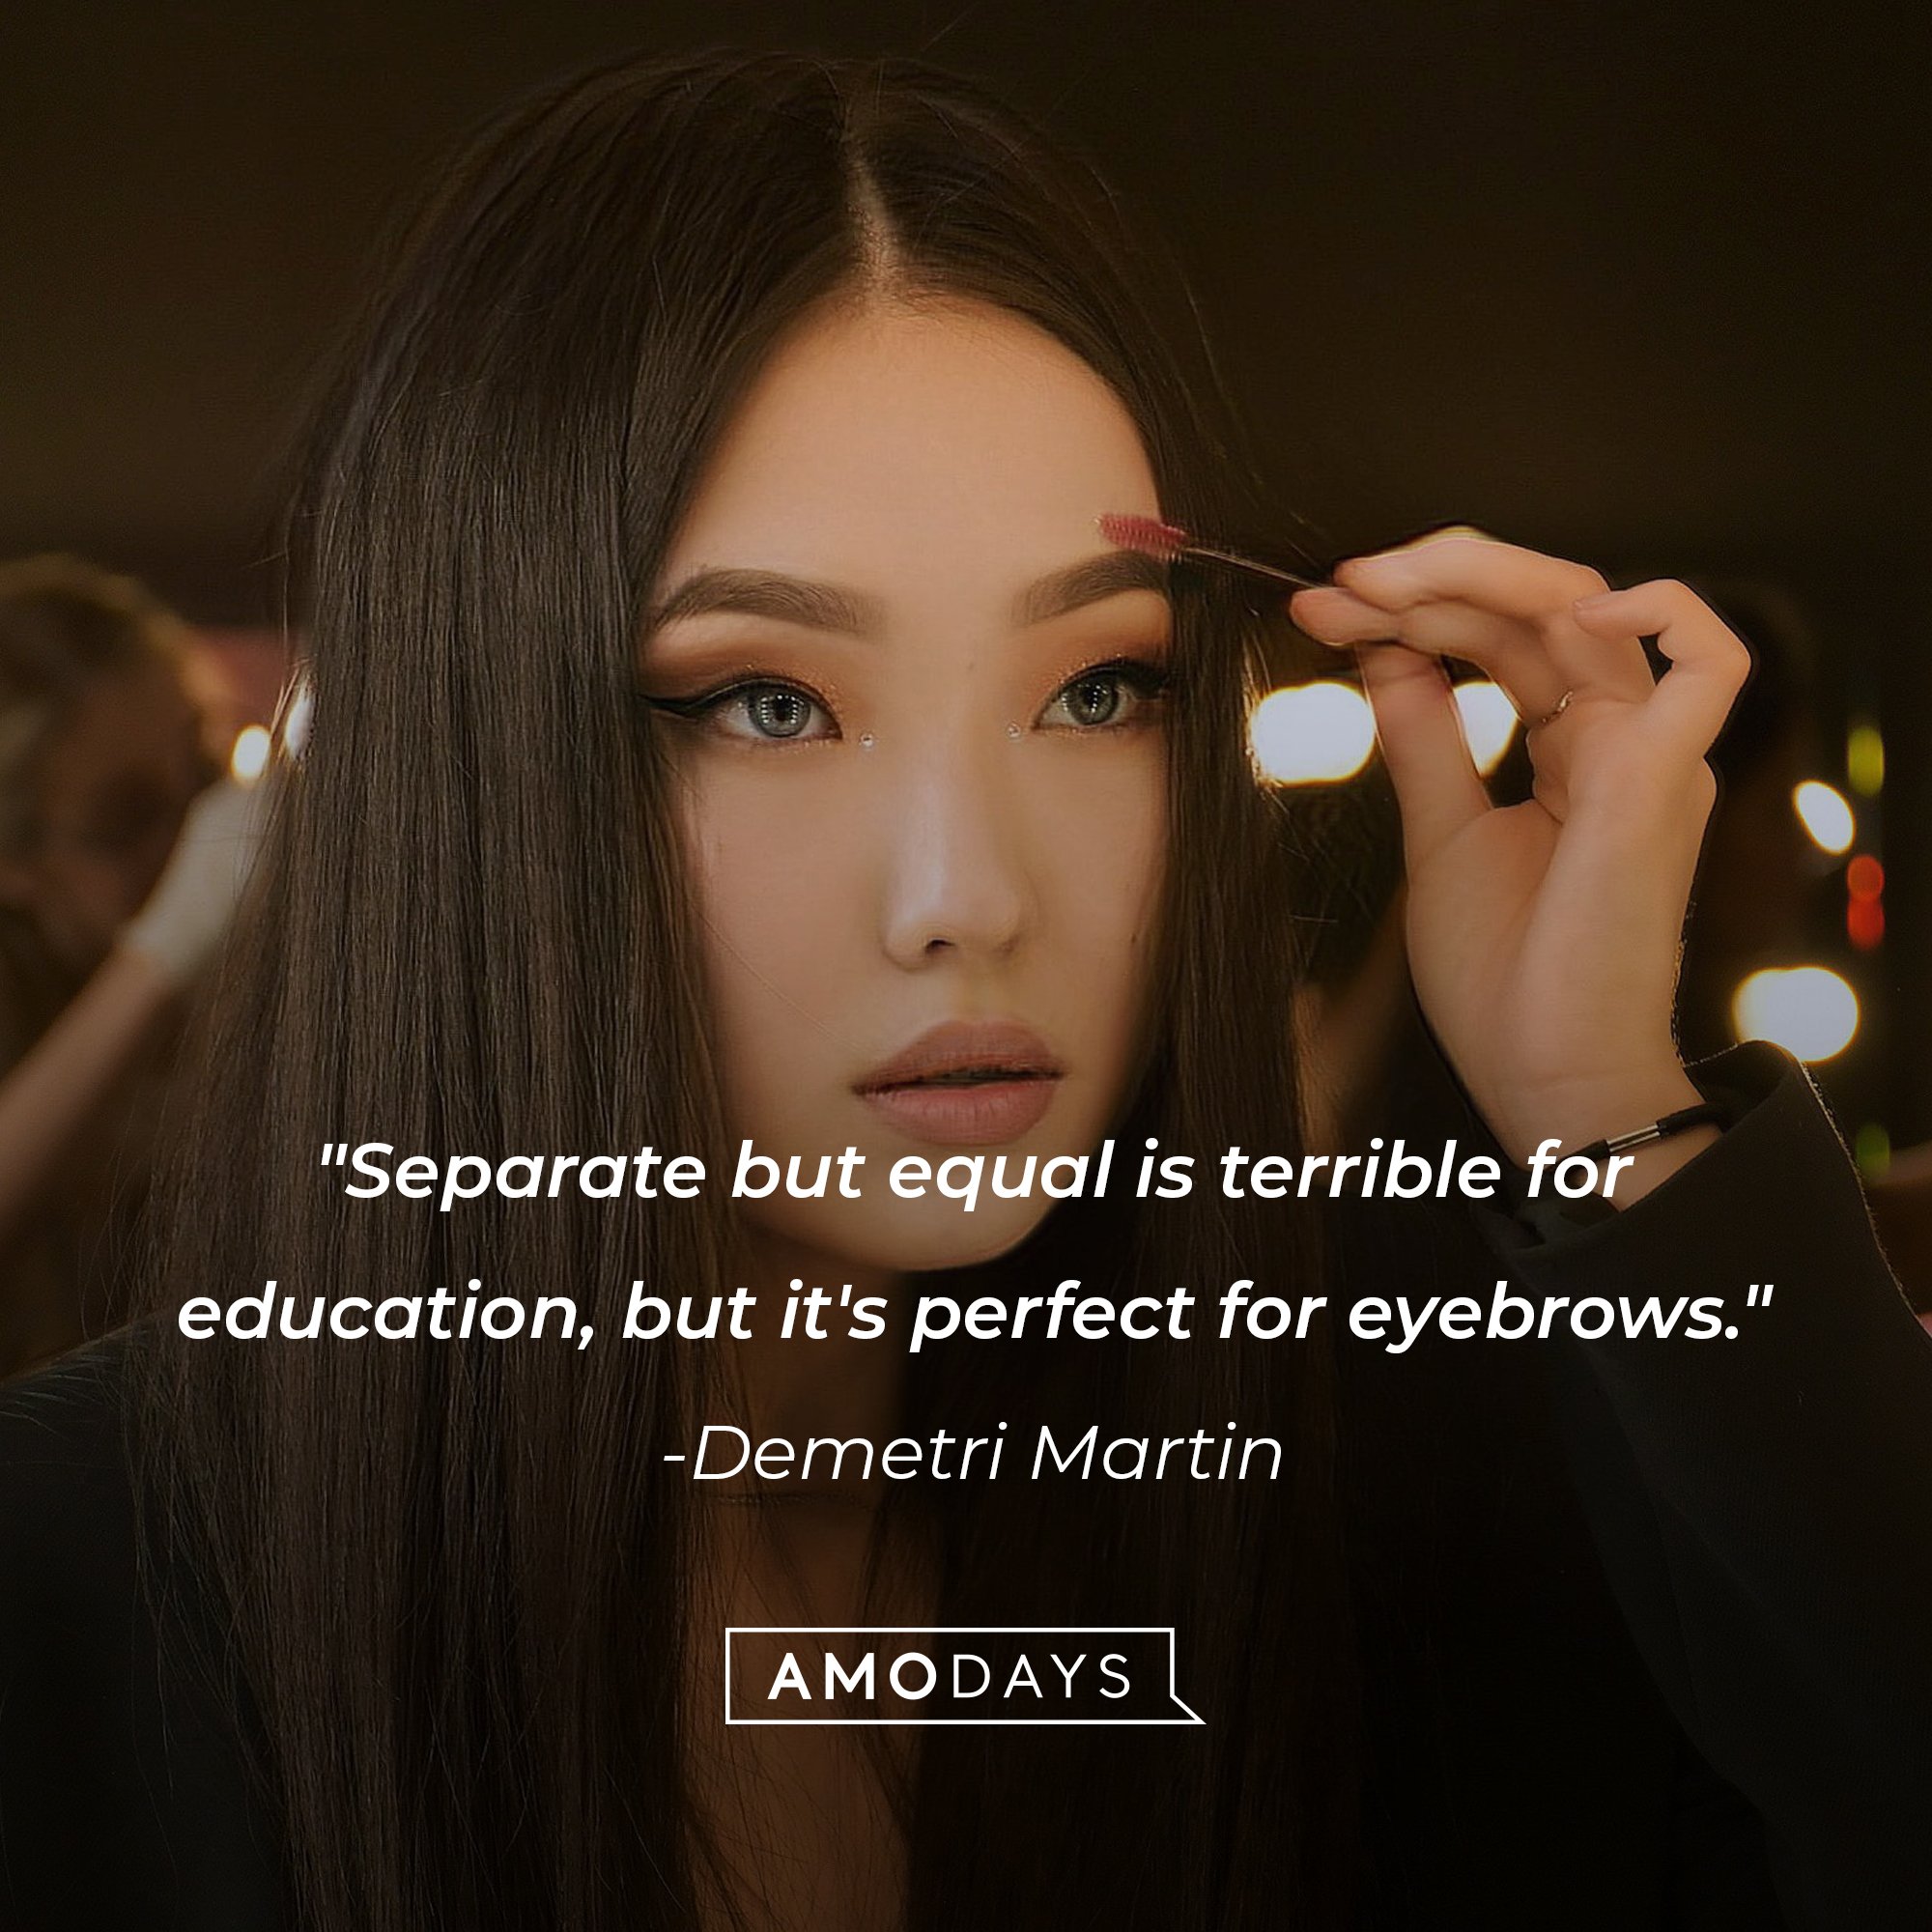 Demetri Martin’s quote: "Separate but equal is terrible for education, but it's perfect for eyebrows." | Image: AmoDays  